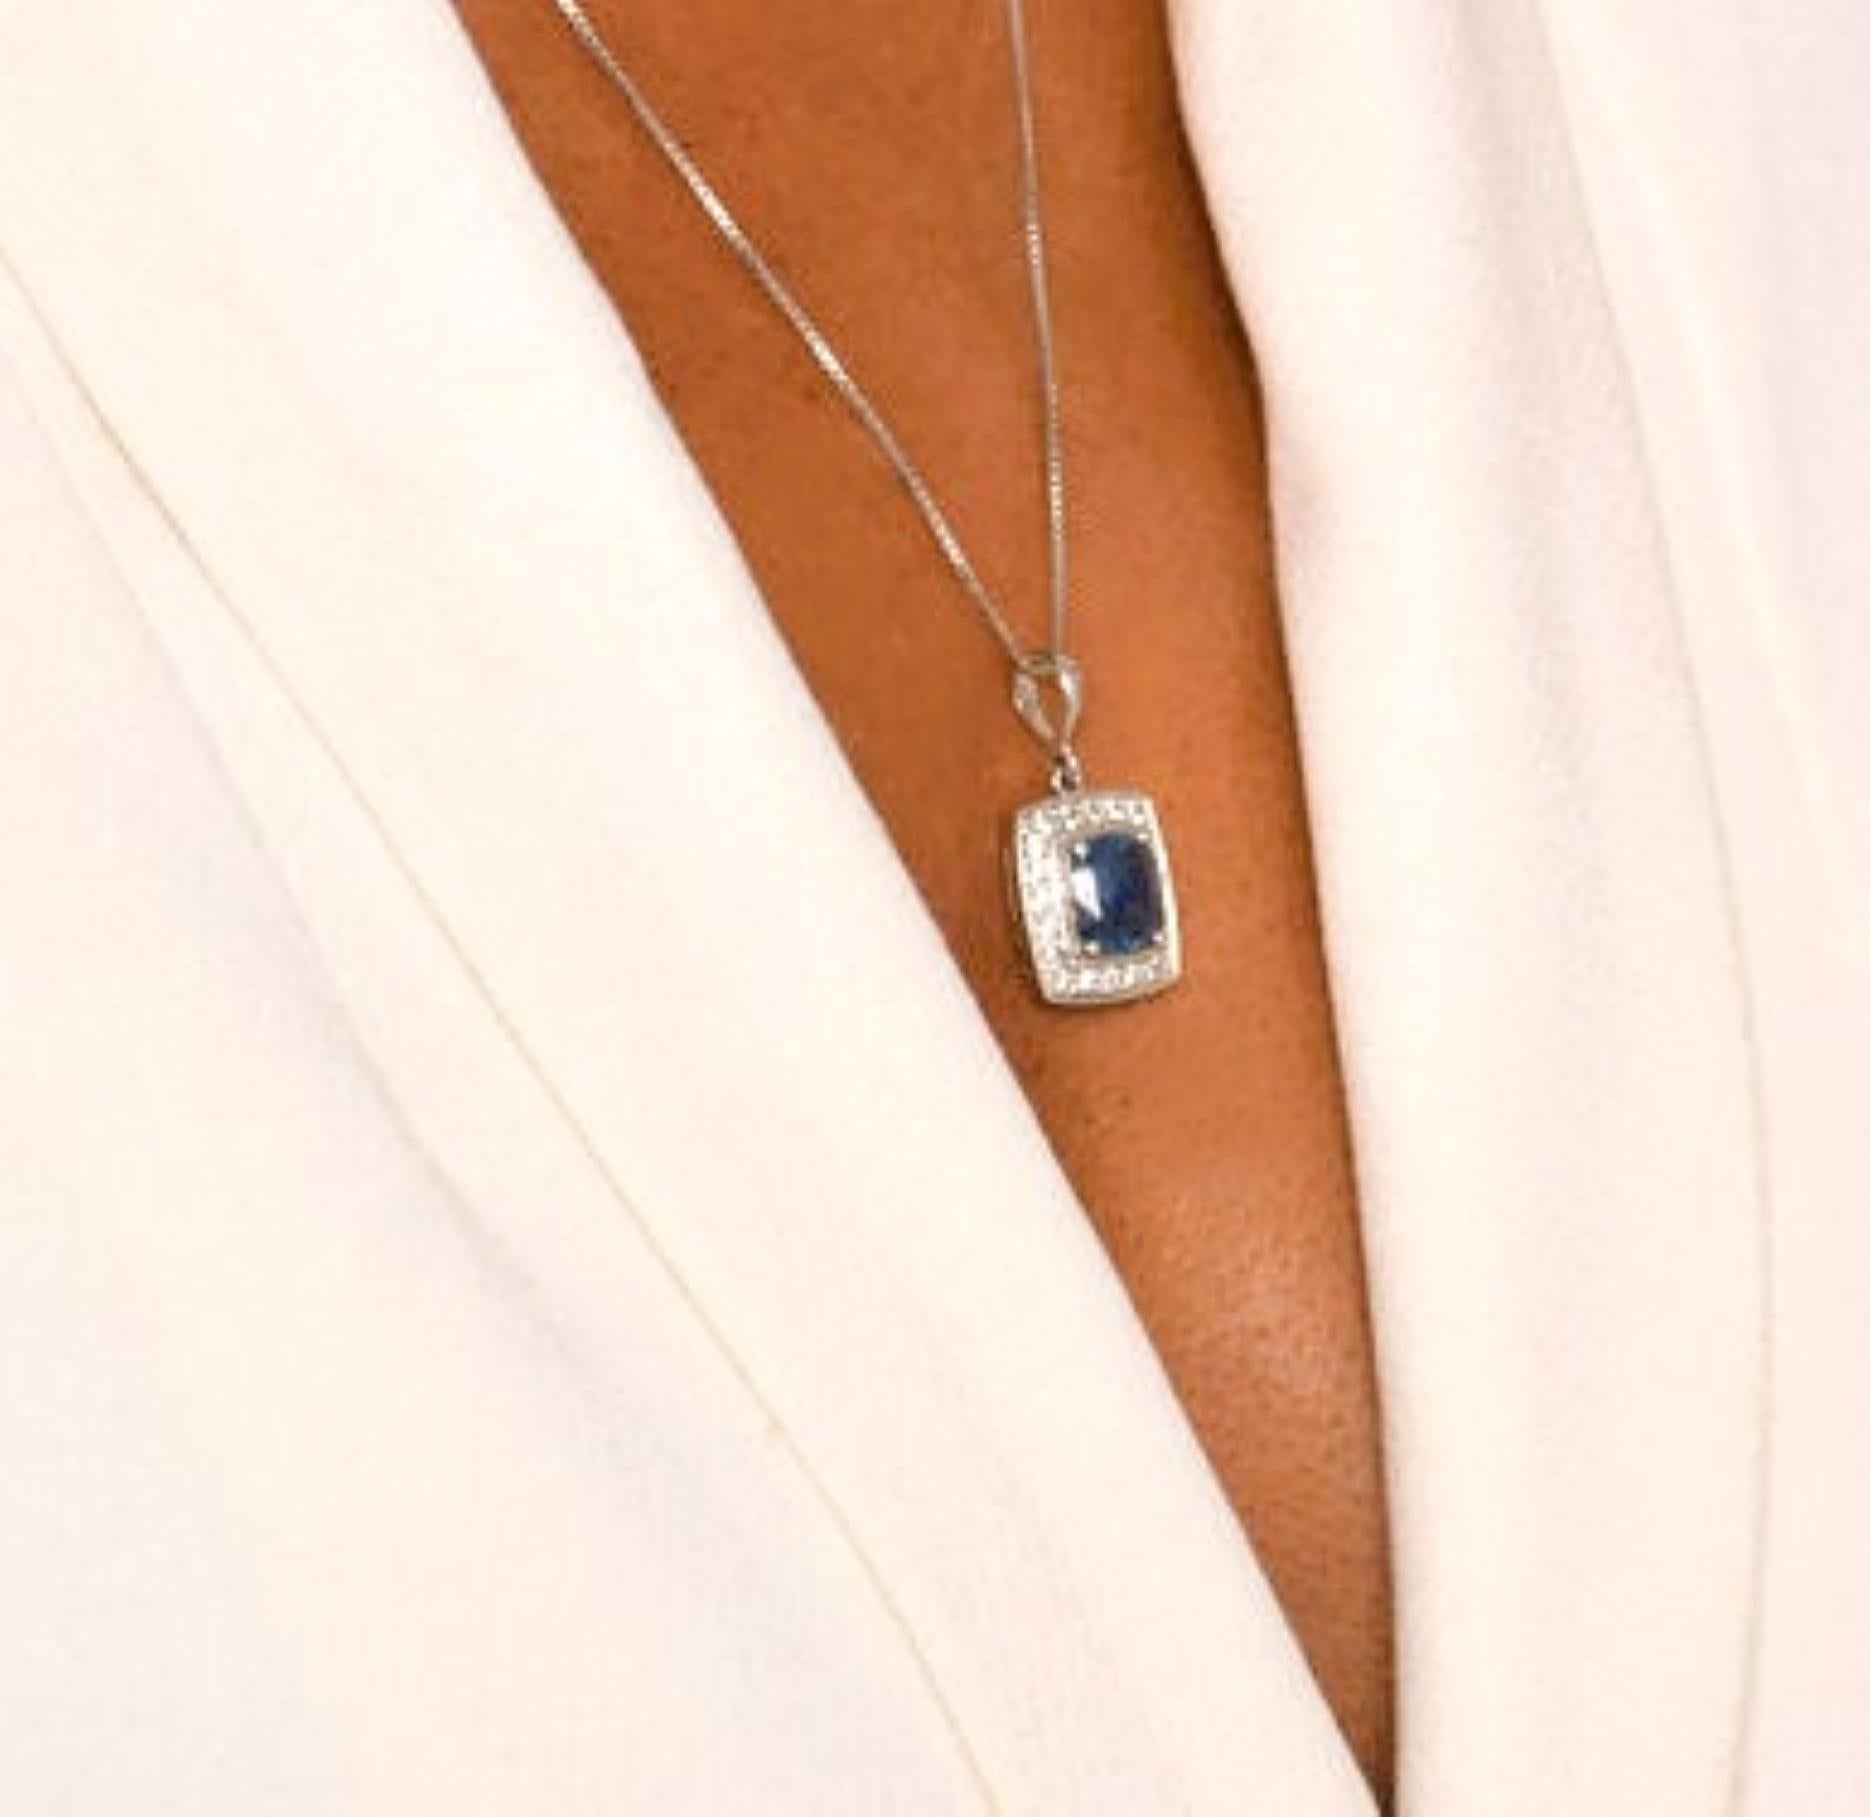 Make a statement with this magnificent 2ct natural blue sapphire pendant of platinum silver. The centerpiece of this pendant is a breathtaking 7.2x6.8mm cushion cut natural blue sapphire, weighing 2 carats, surrounded by 20 sparkling 2.5mm natural